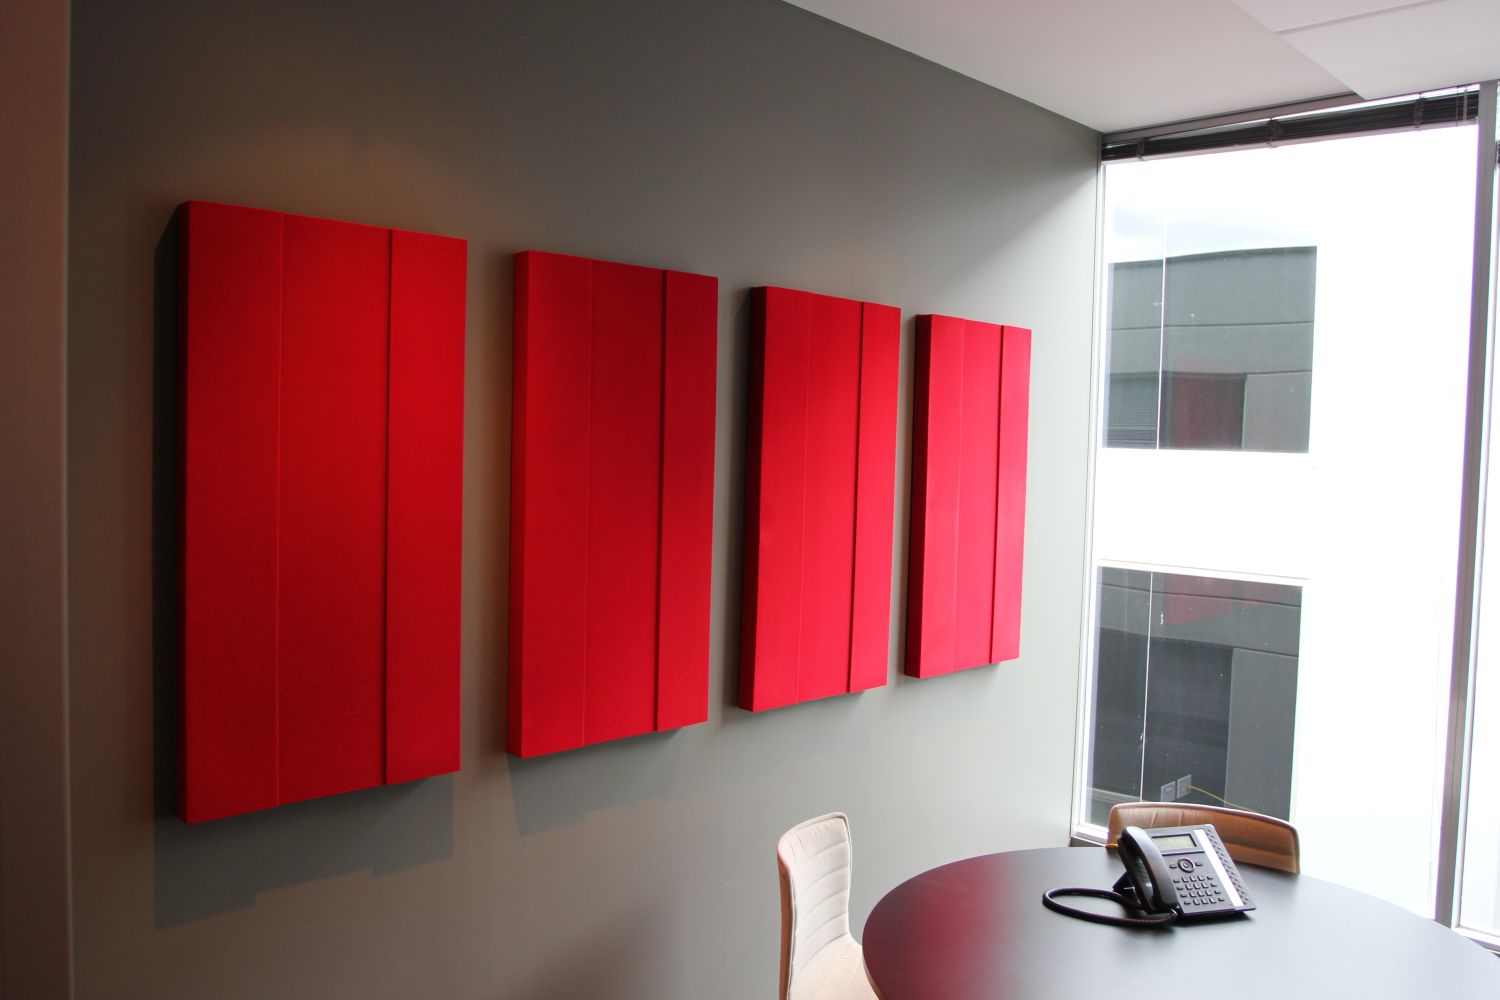 How Do Acoustic Panels Work